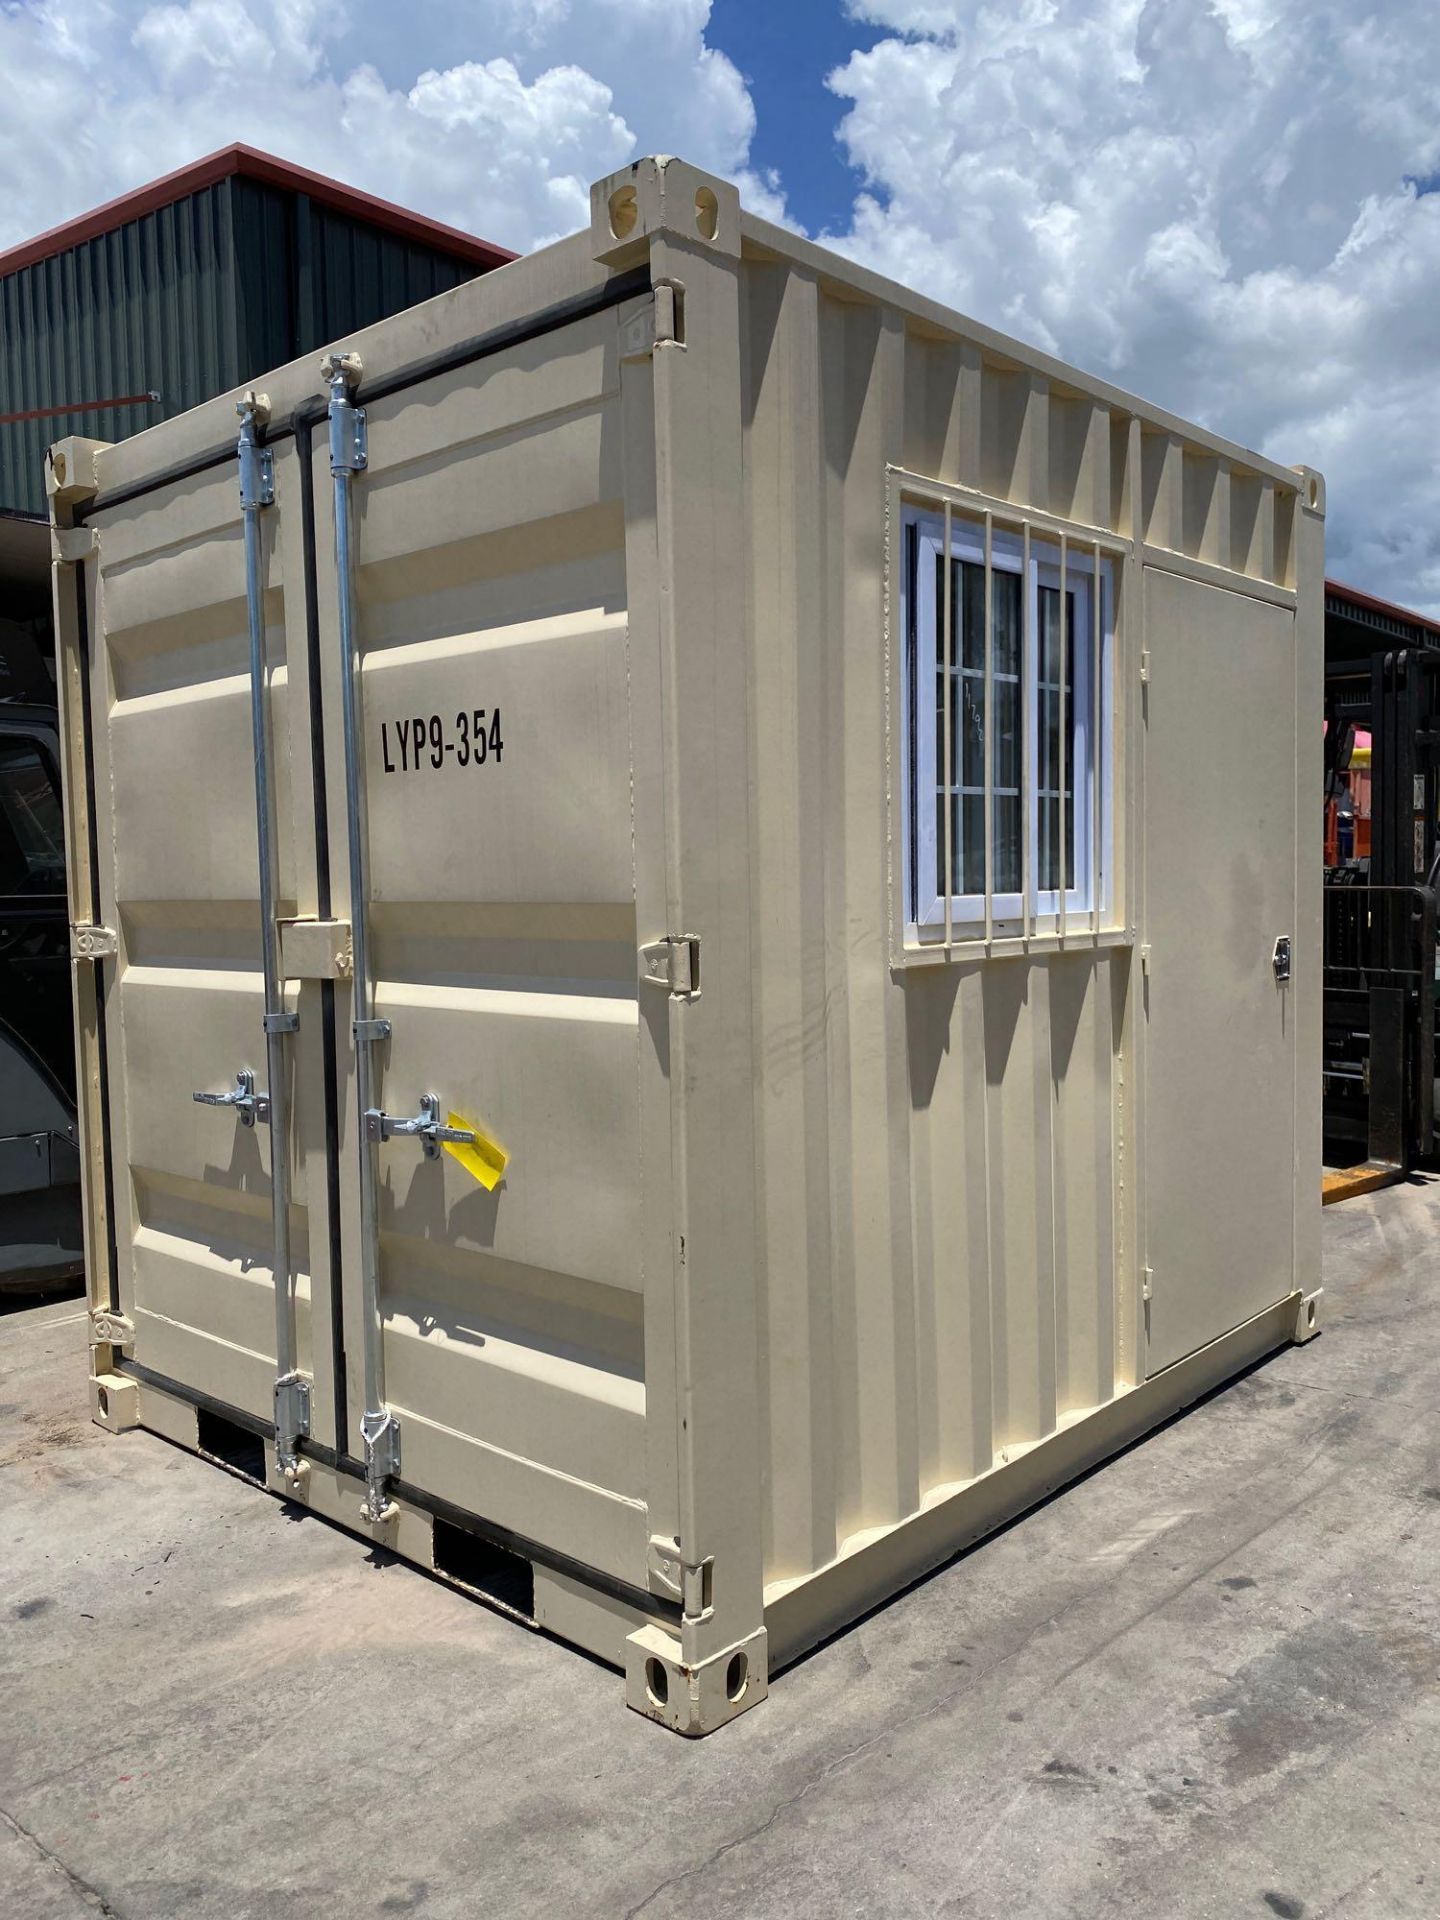 UNUSED 2020 PORTABLE OFFICE CONTAINER WITH WINDOW & SIDE DOOR. - Image 2 of 6